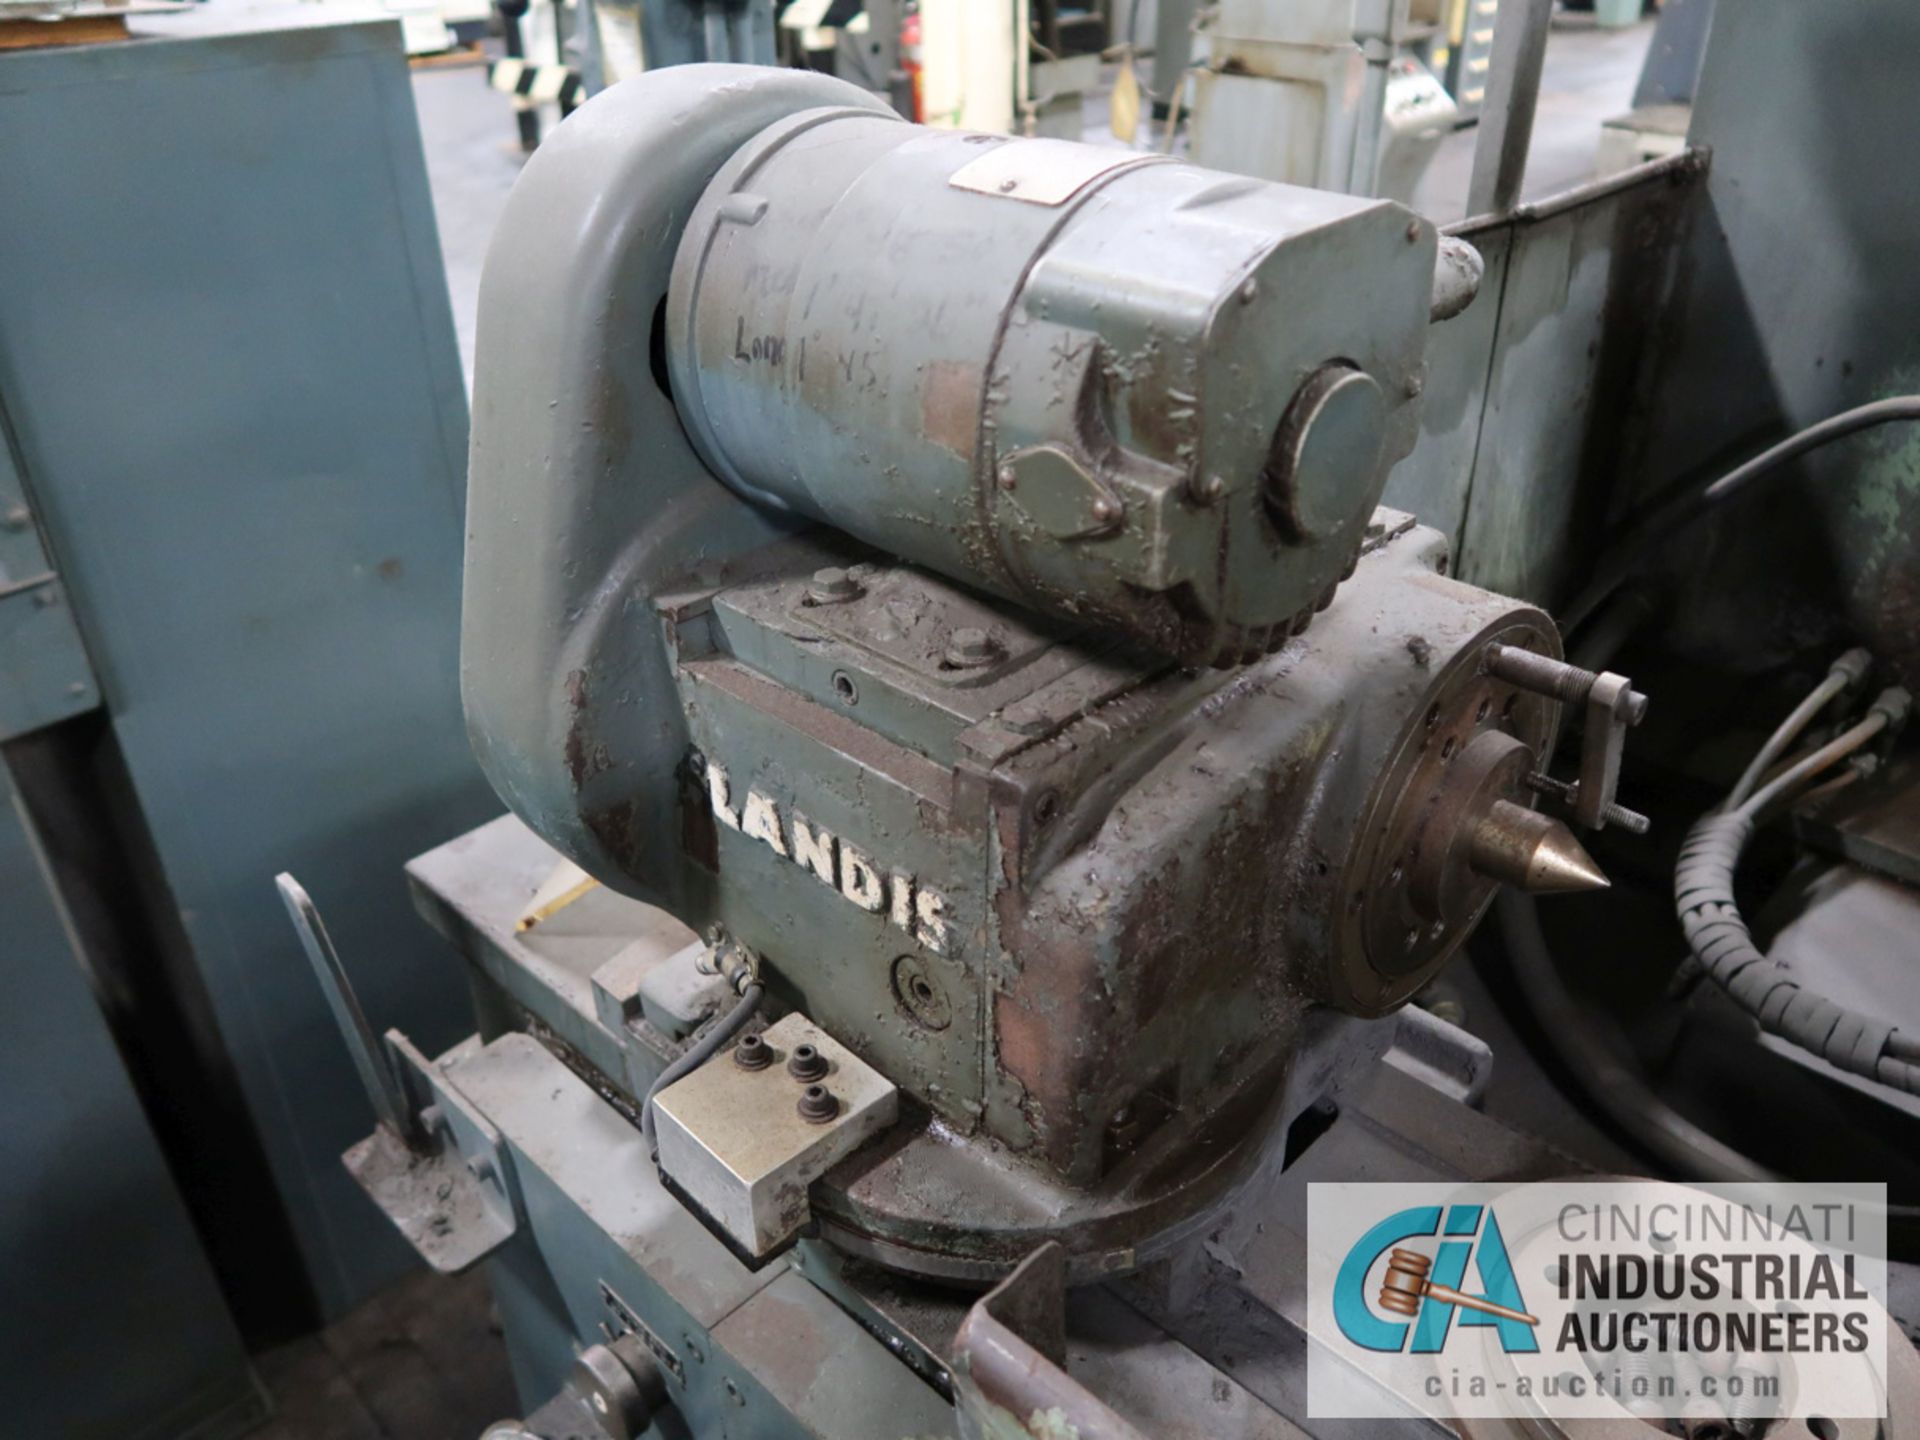 10" X 24" LANDIS TYPE 2R UNIVERSAL O.D. CYLINDRICAL GRINDER; S/N 856-42, DRO - Image 5 of 11